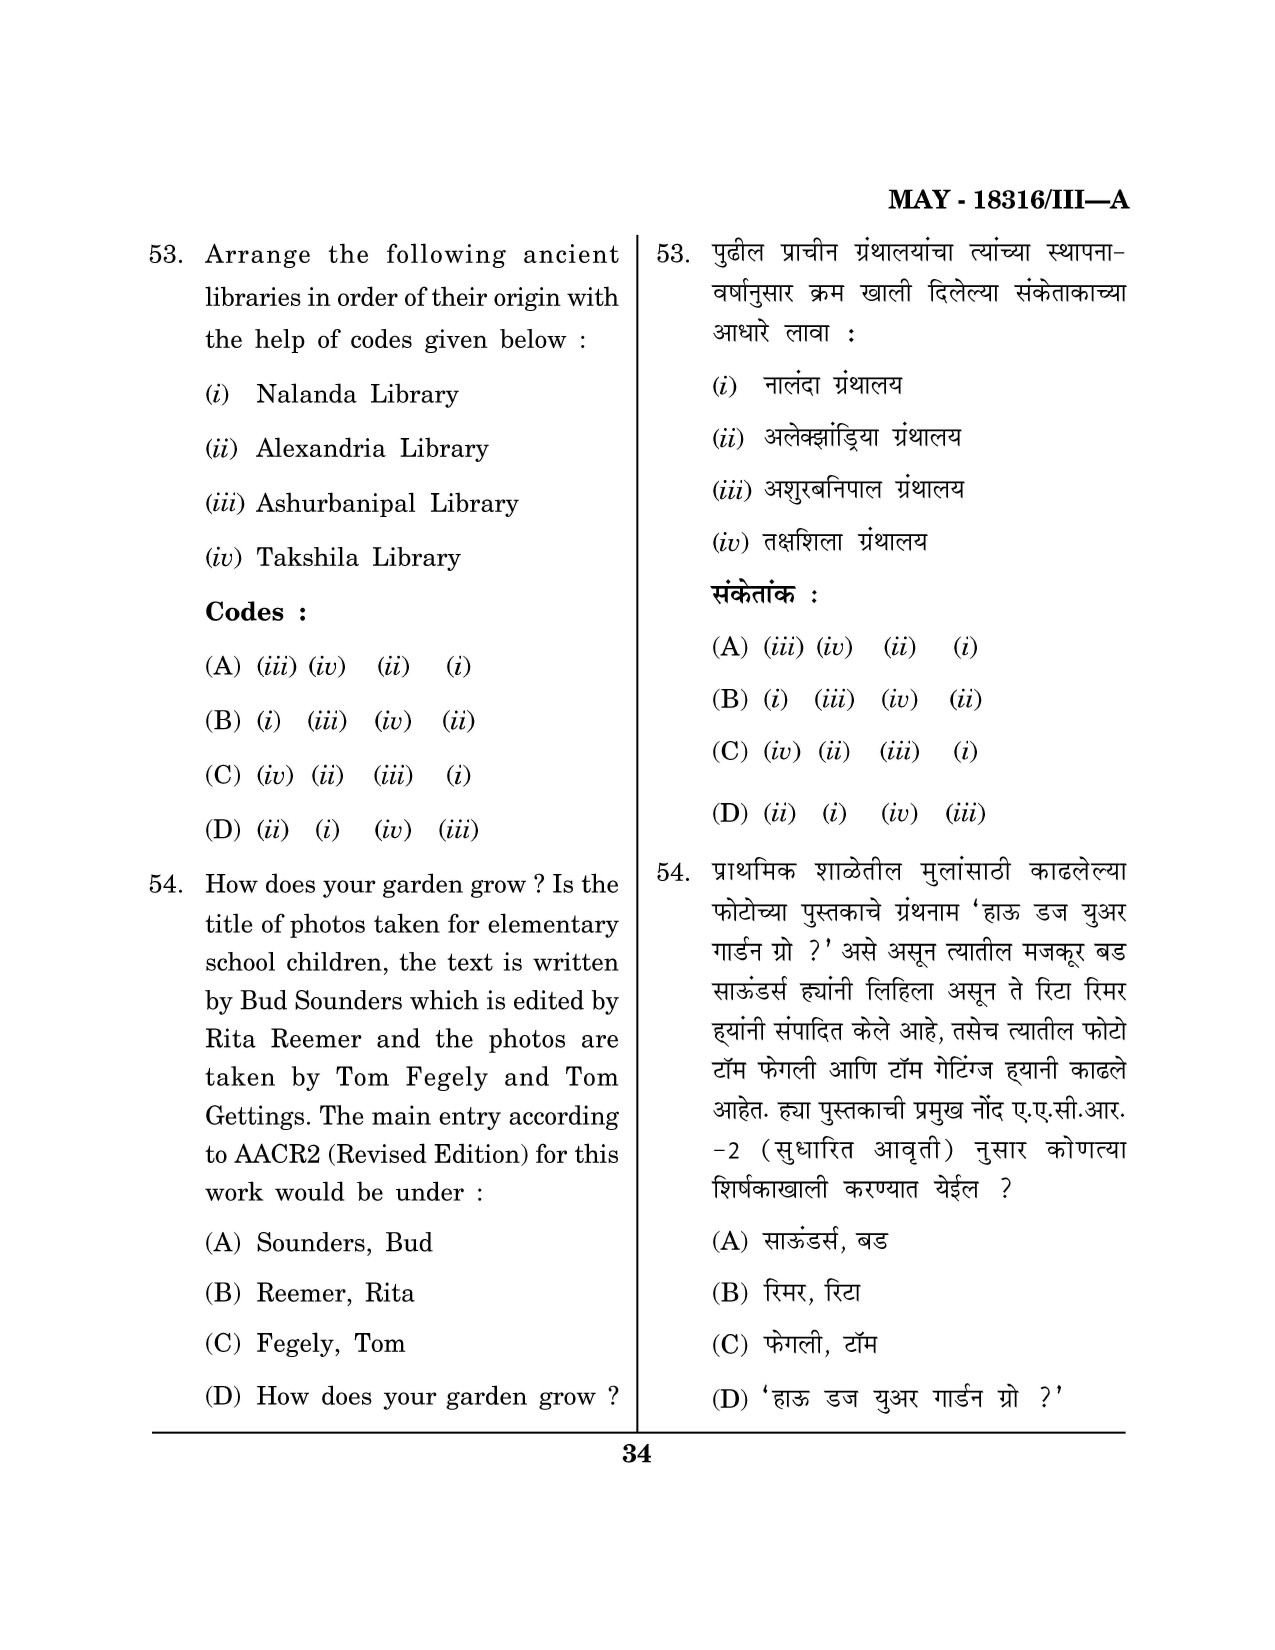 Maharashtra SET Library Information Science Question Paper III May 2016 33